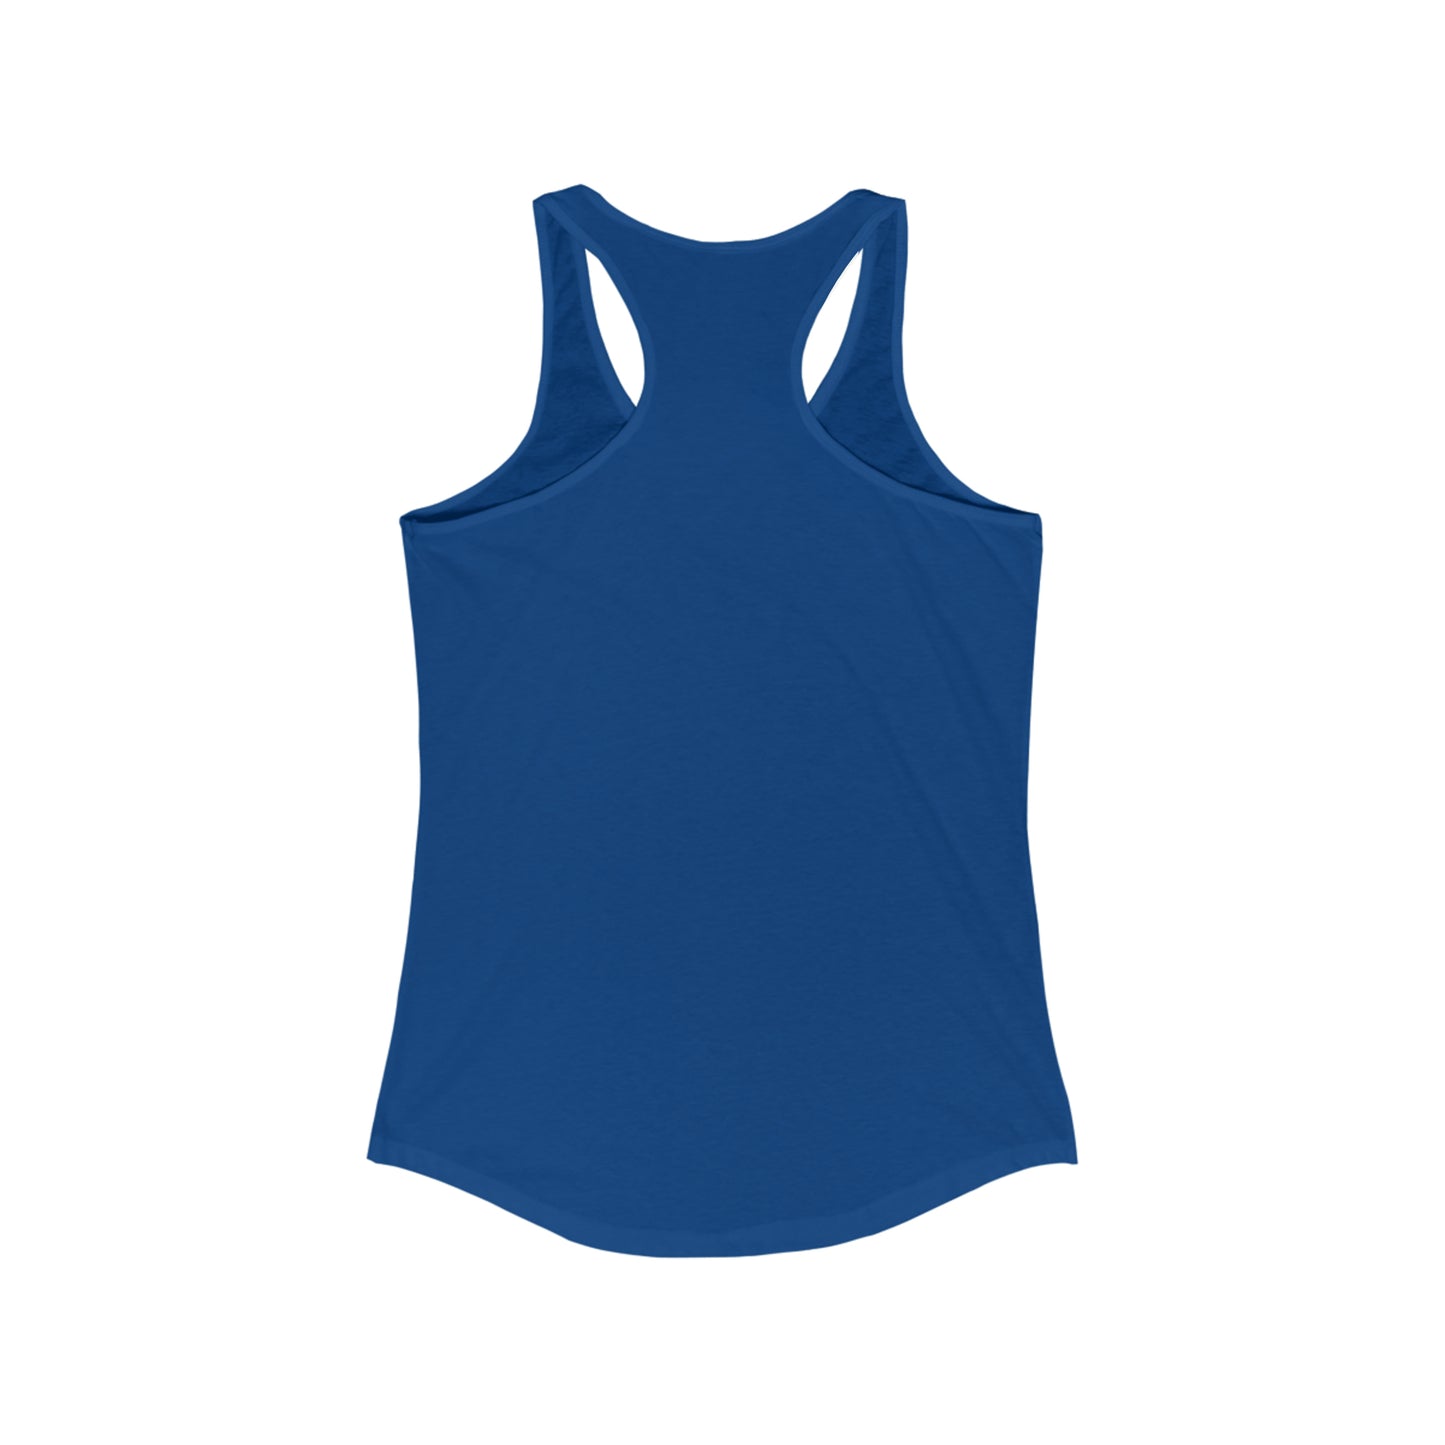 Women's  Tank Top  Ready To Live